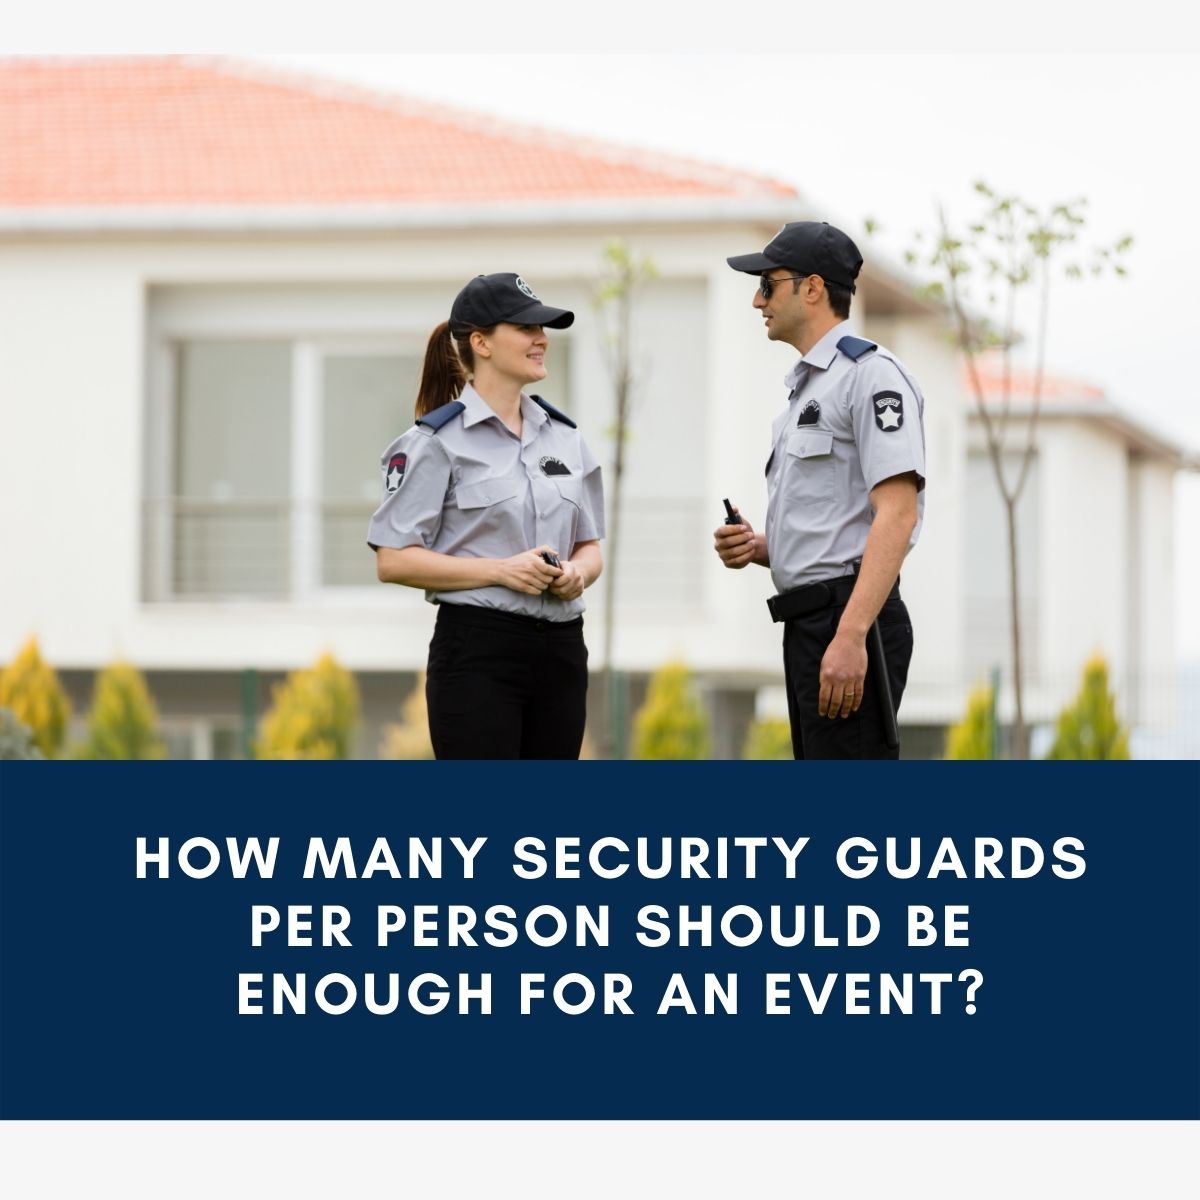 How Many Security Guards Per Person for an event